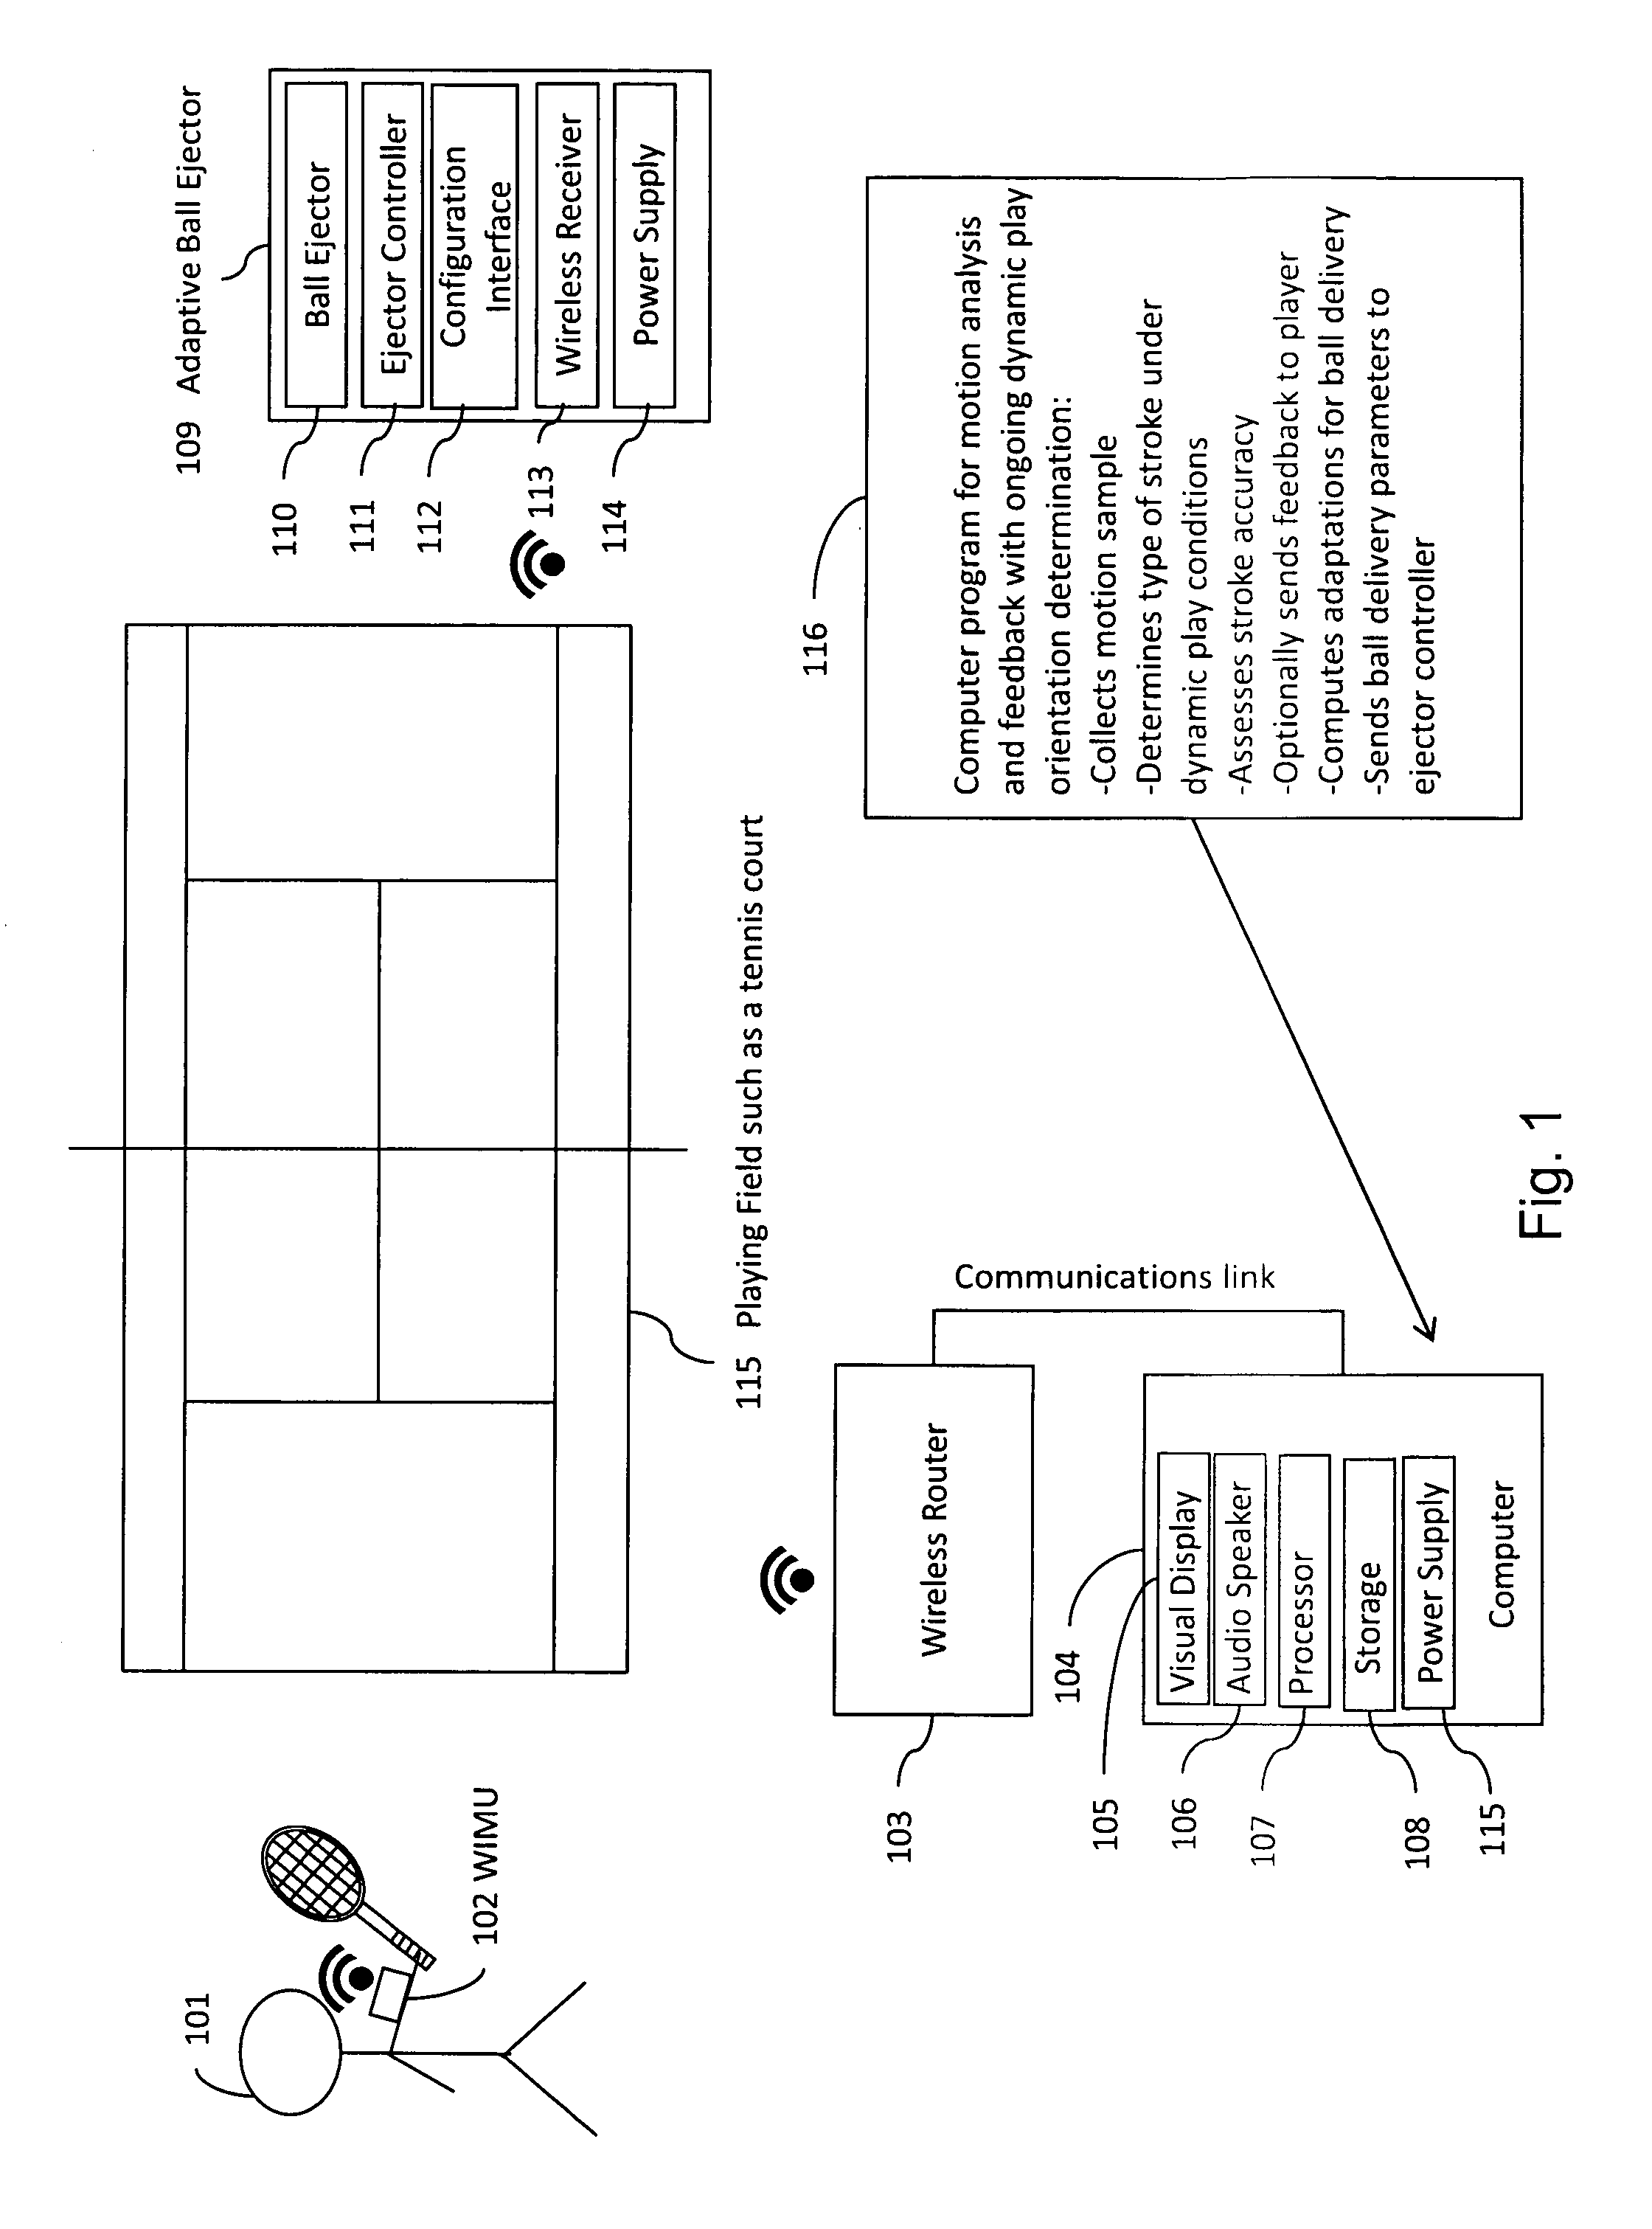 System and method for adaptive delivery of game balls based on player-specific performance data analysis